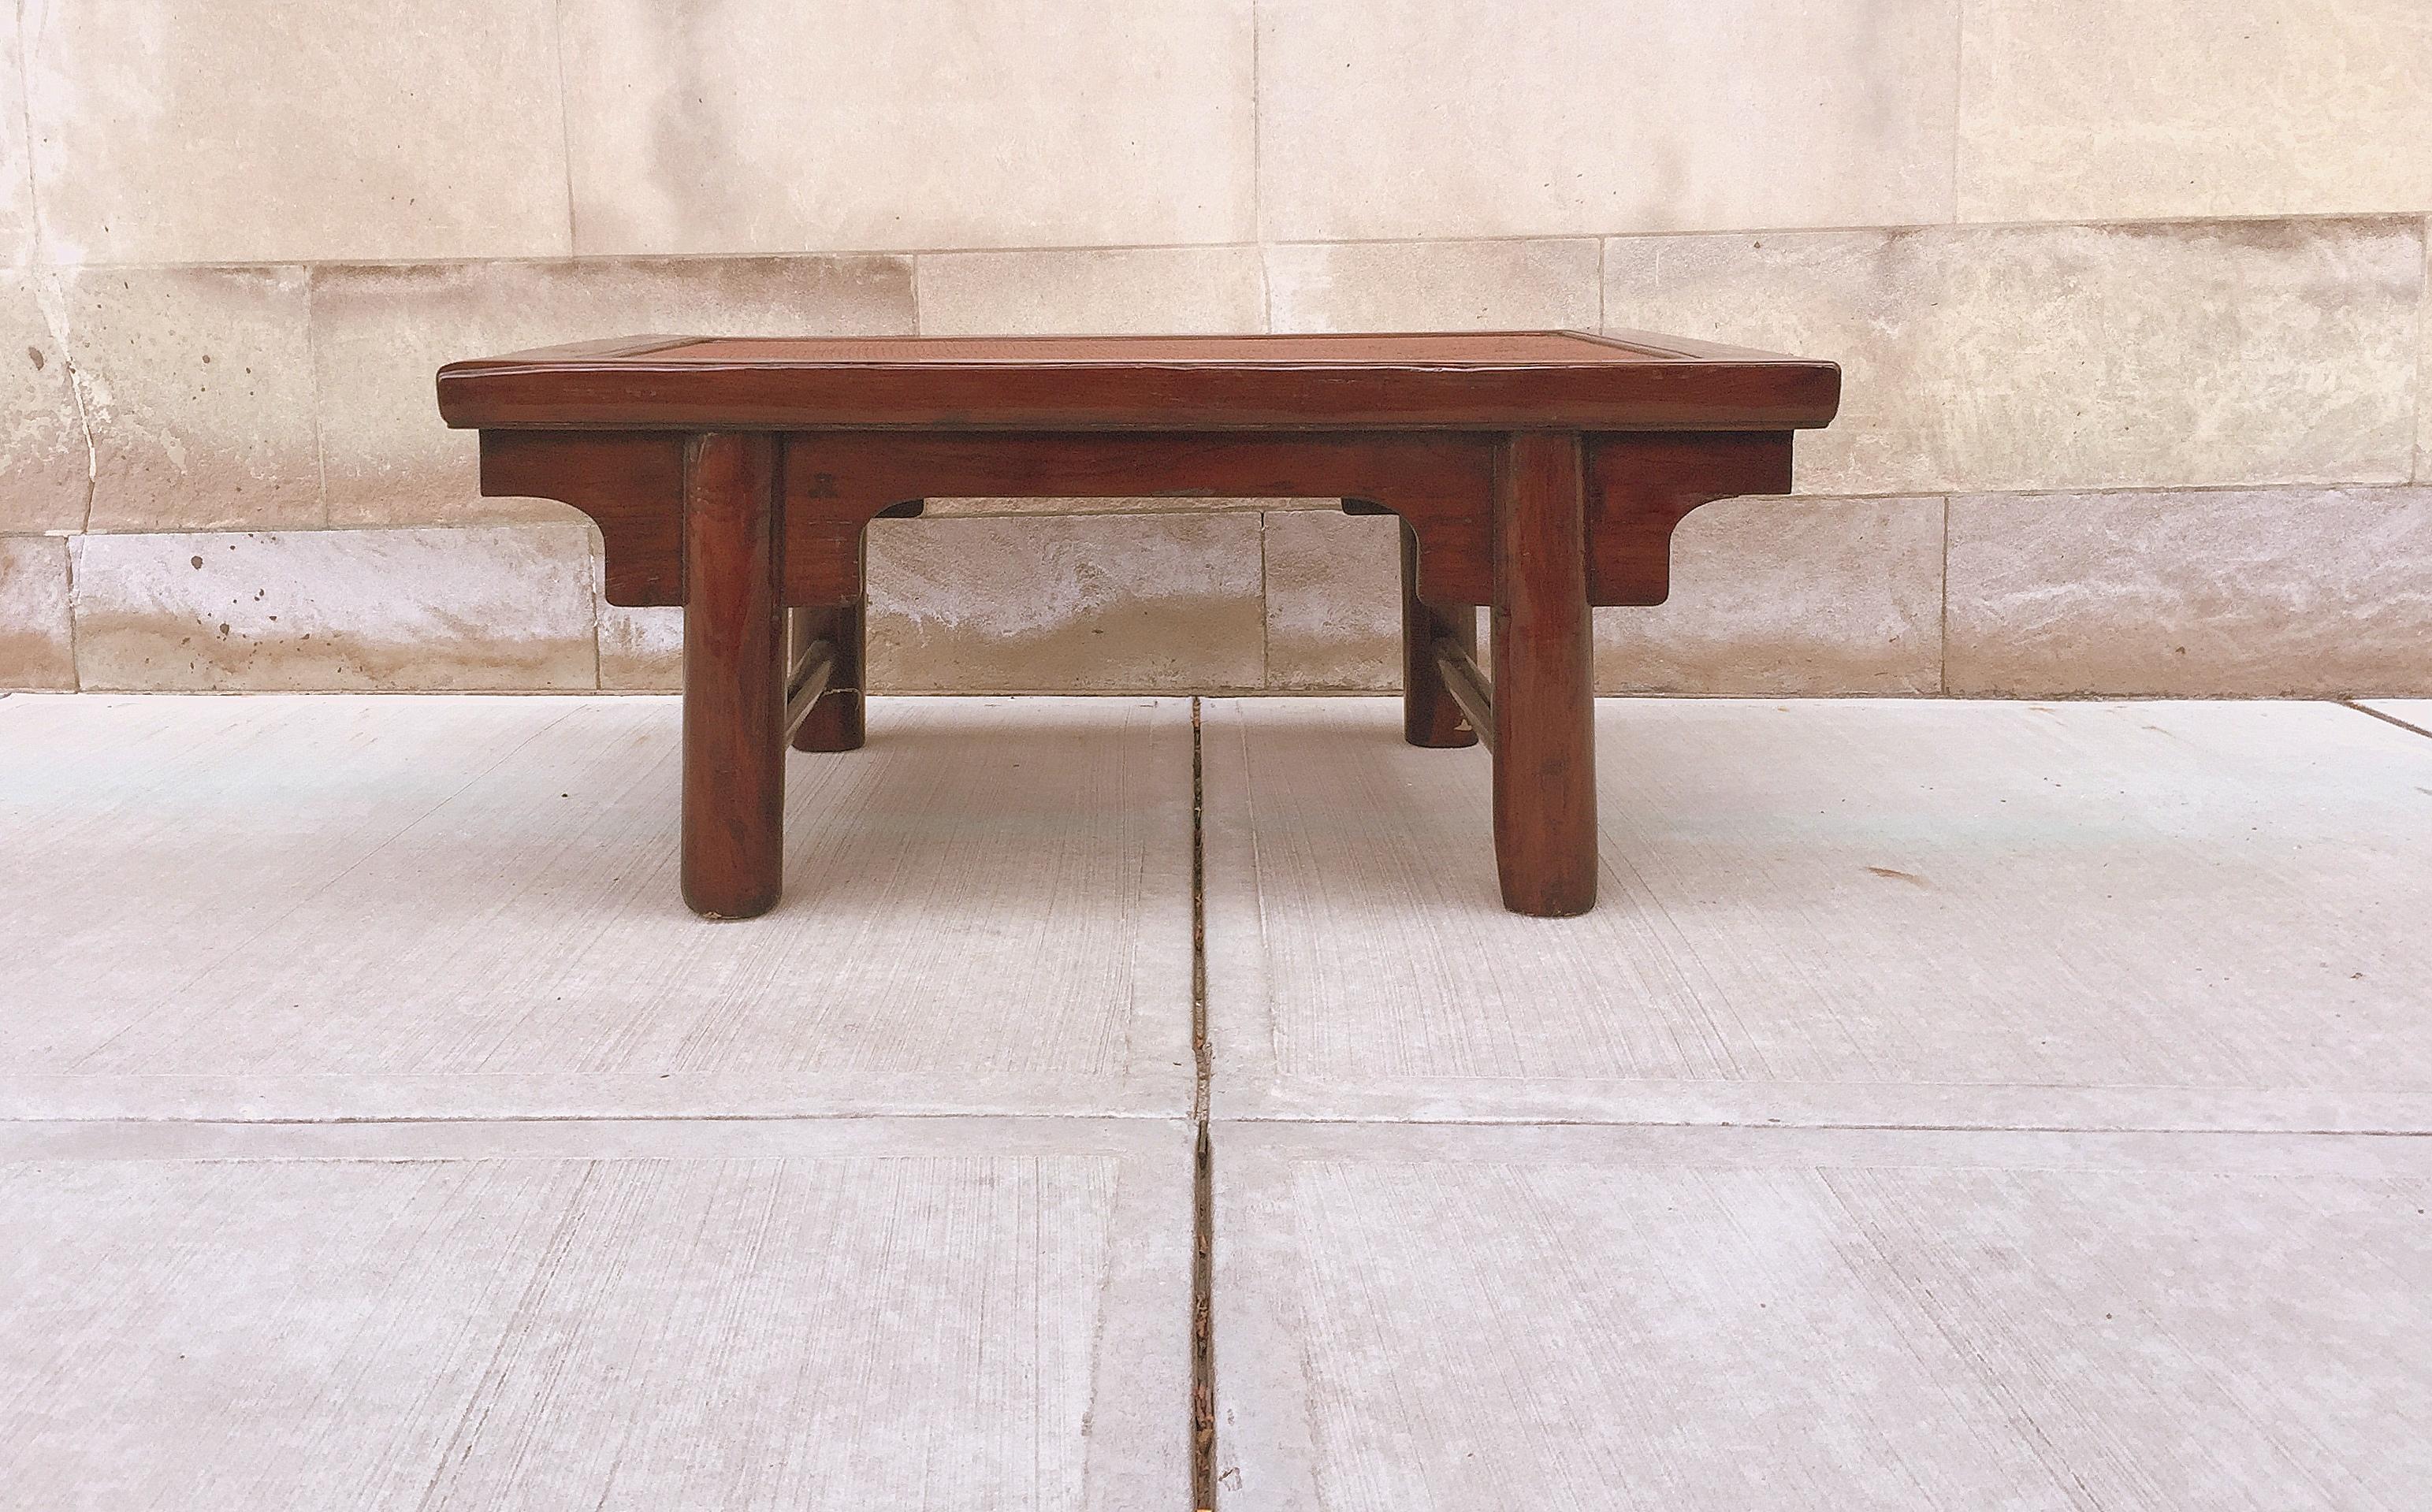 Simple Jumu wood low table with framed cane top, beautiful wood grain and texture.